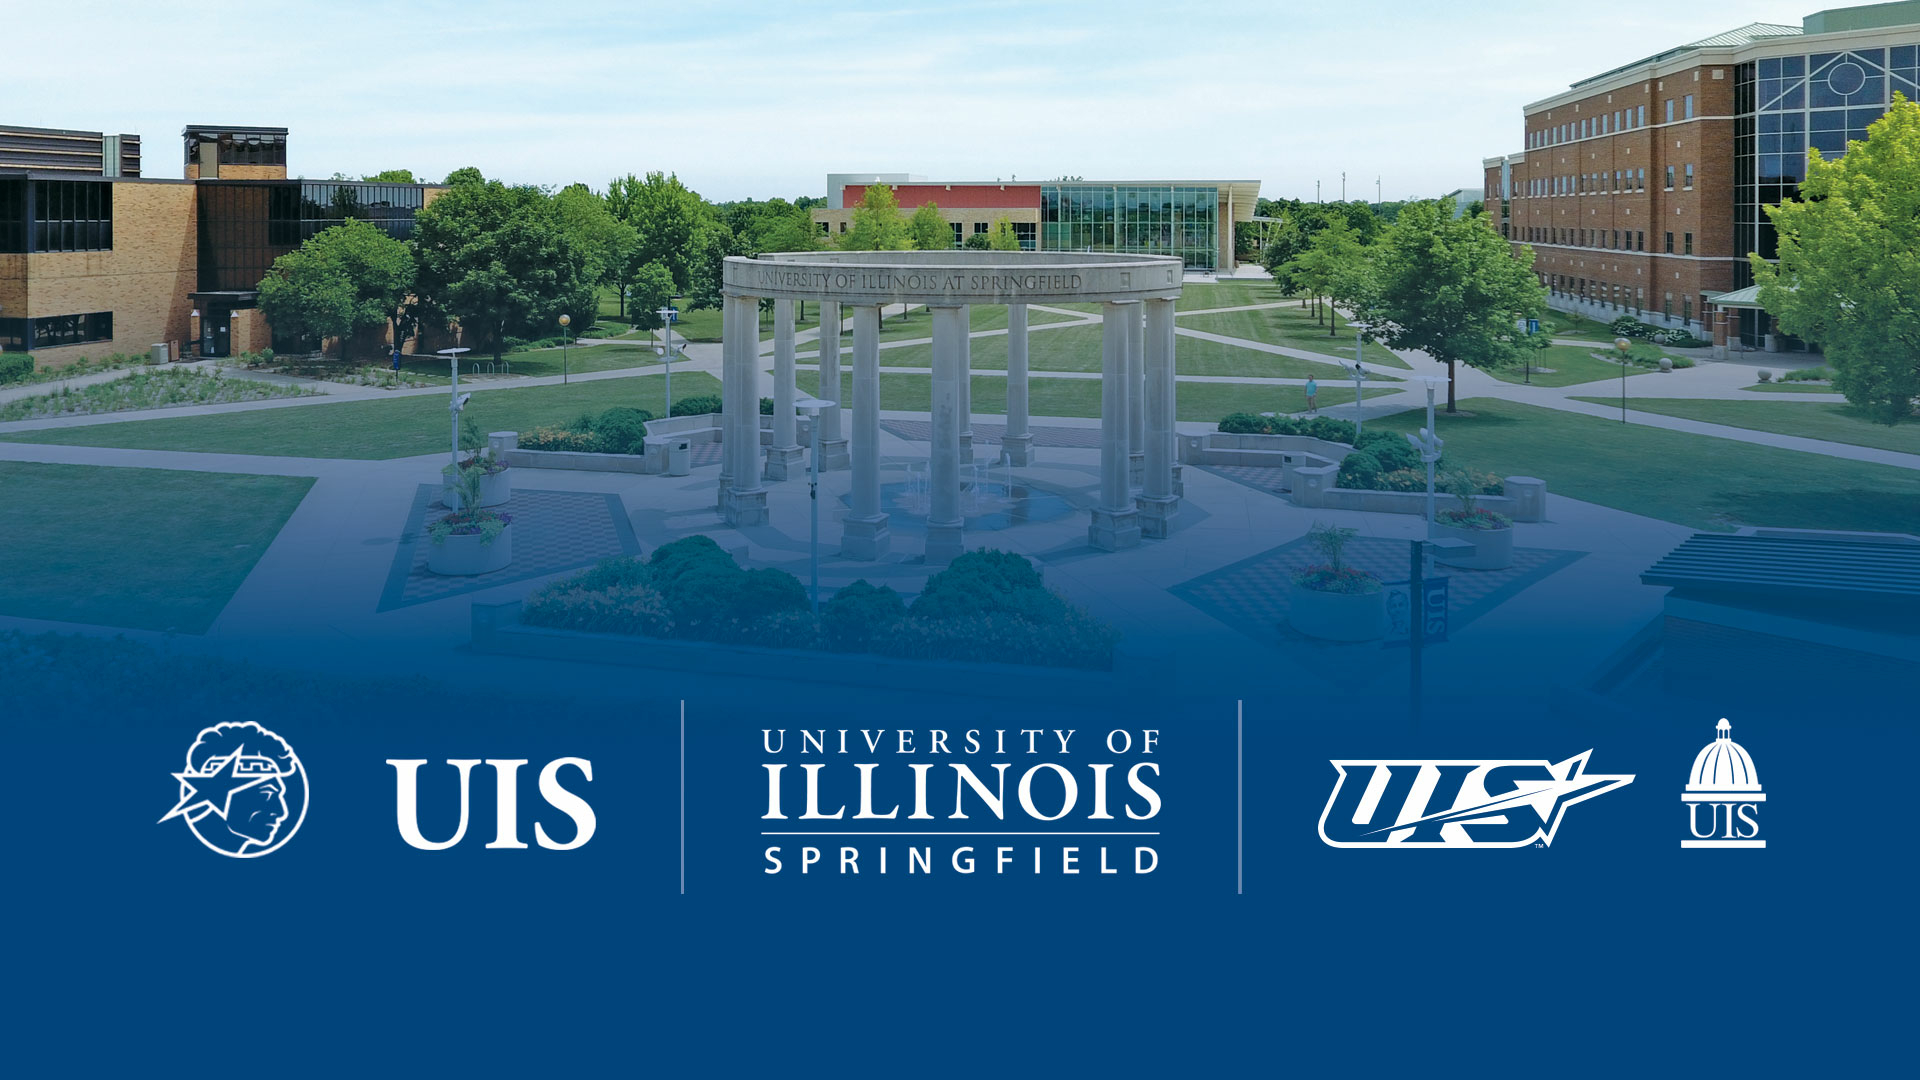 A wide shot of the campus, colonnade in the center, fades to blue at the bottom and shows five UIS logos and wordmarks.